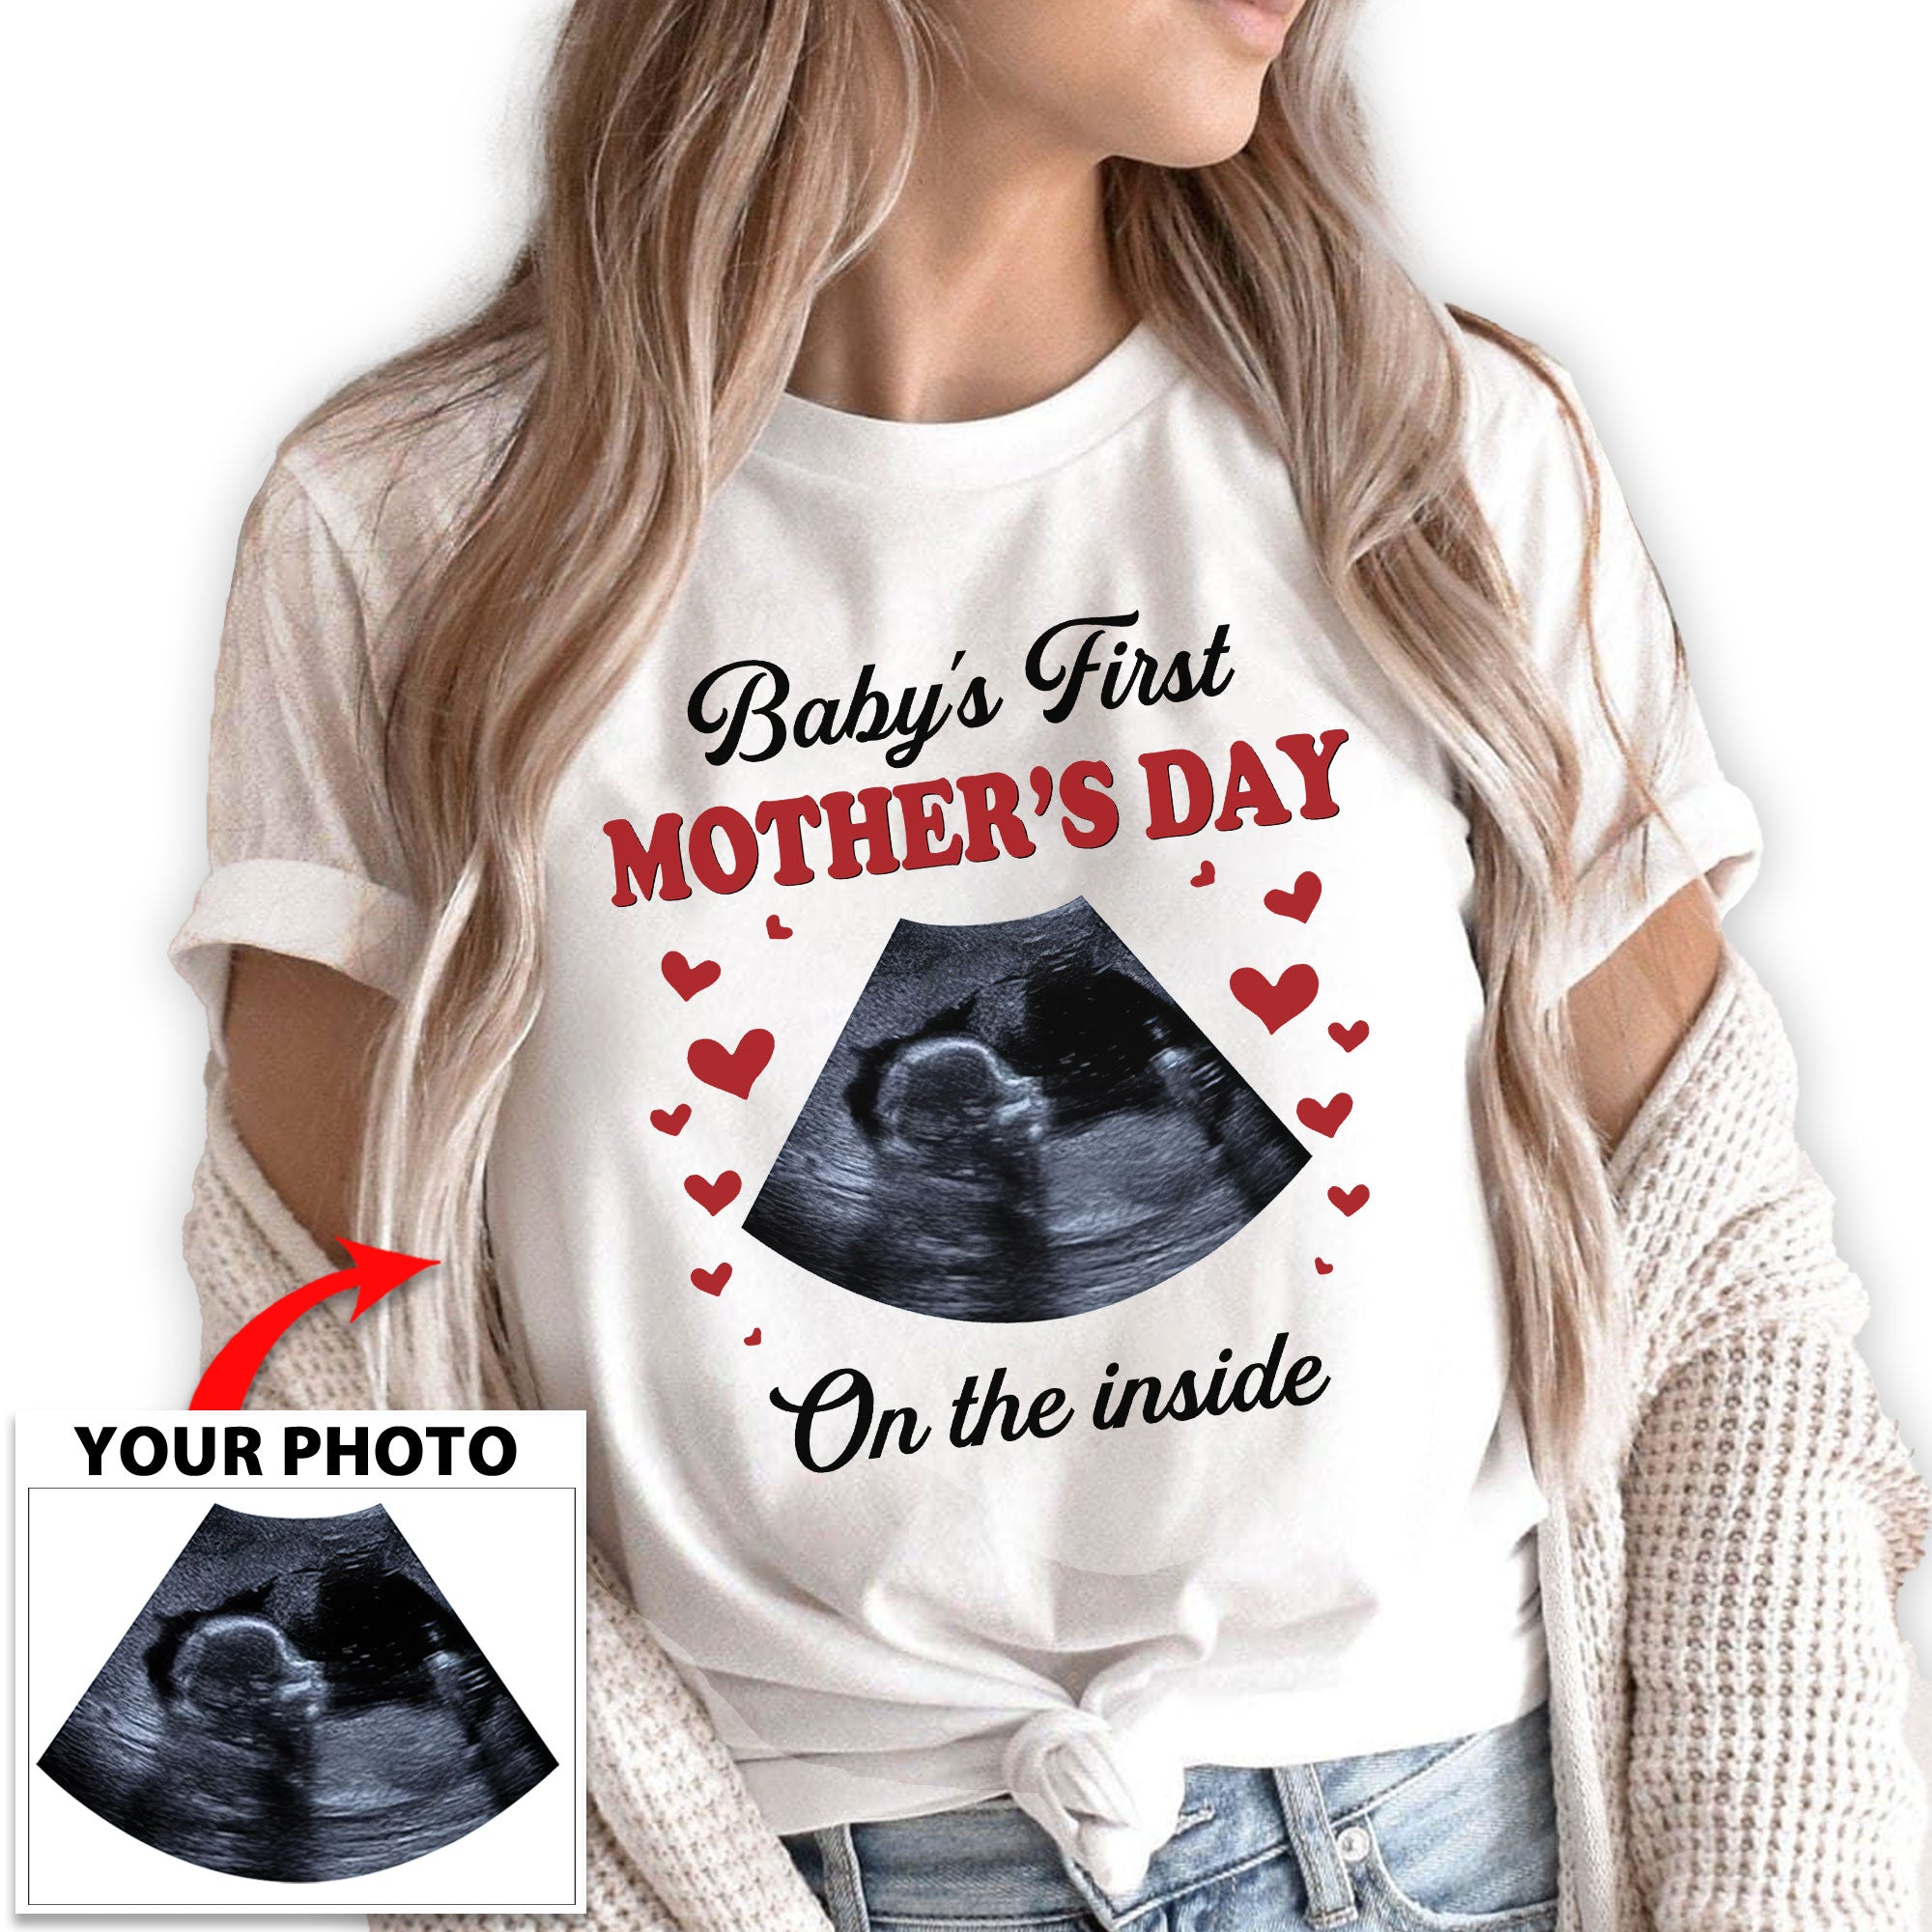 Baby's First Mother's Day on the inside T-SHIRT